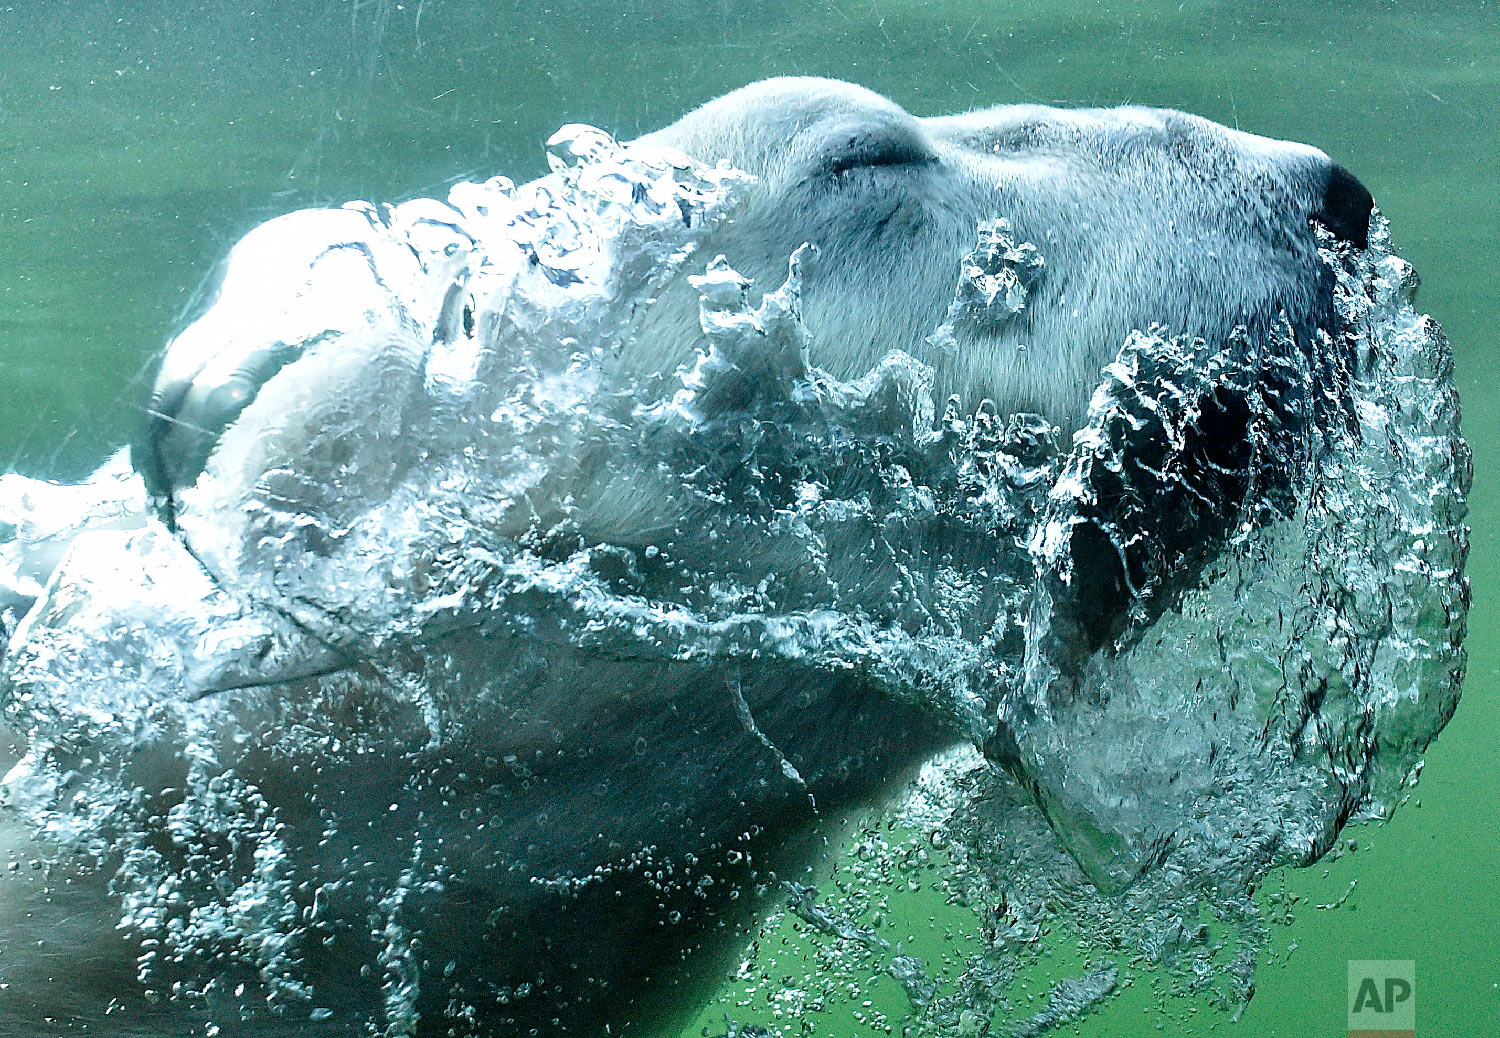  A polar bear blows bubbles as he dives in the water at its enclosure during warm late summer weather at the zoo in Gelsenkirchen, Germany on Oct. 16, 2018. (AP Photo/Martin Meissner) 